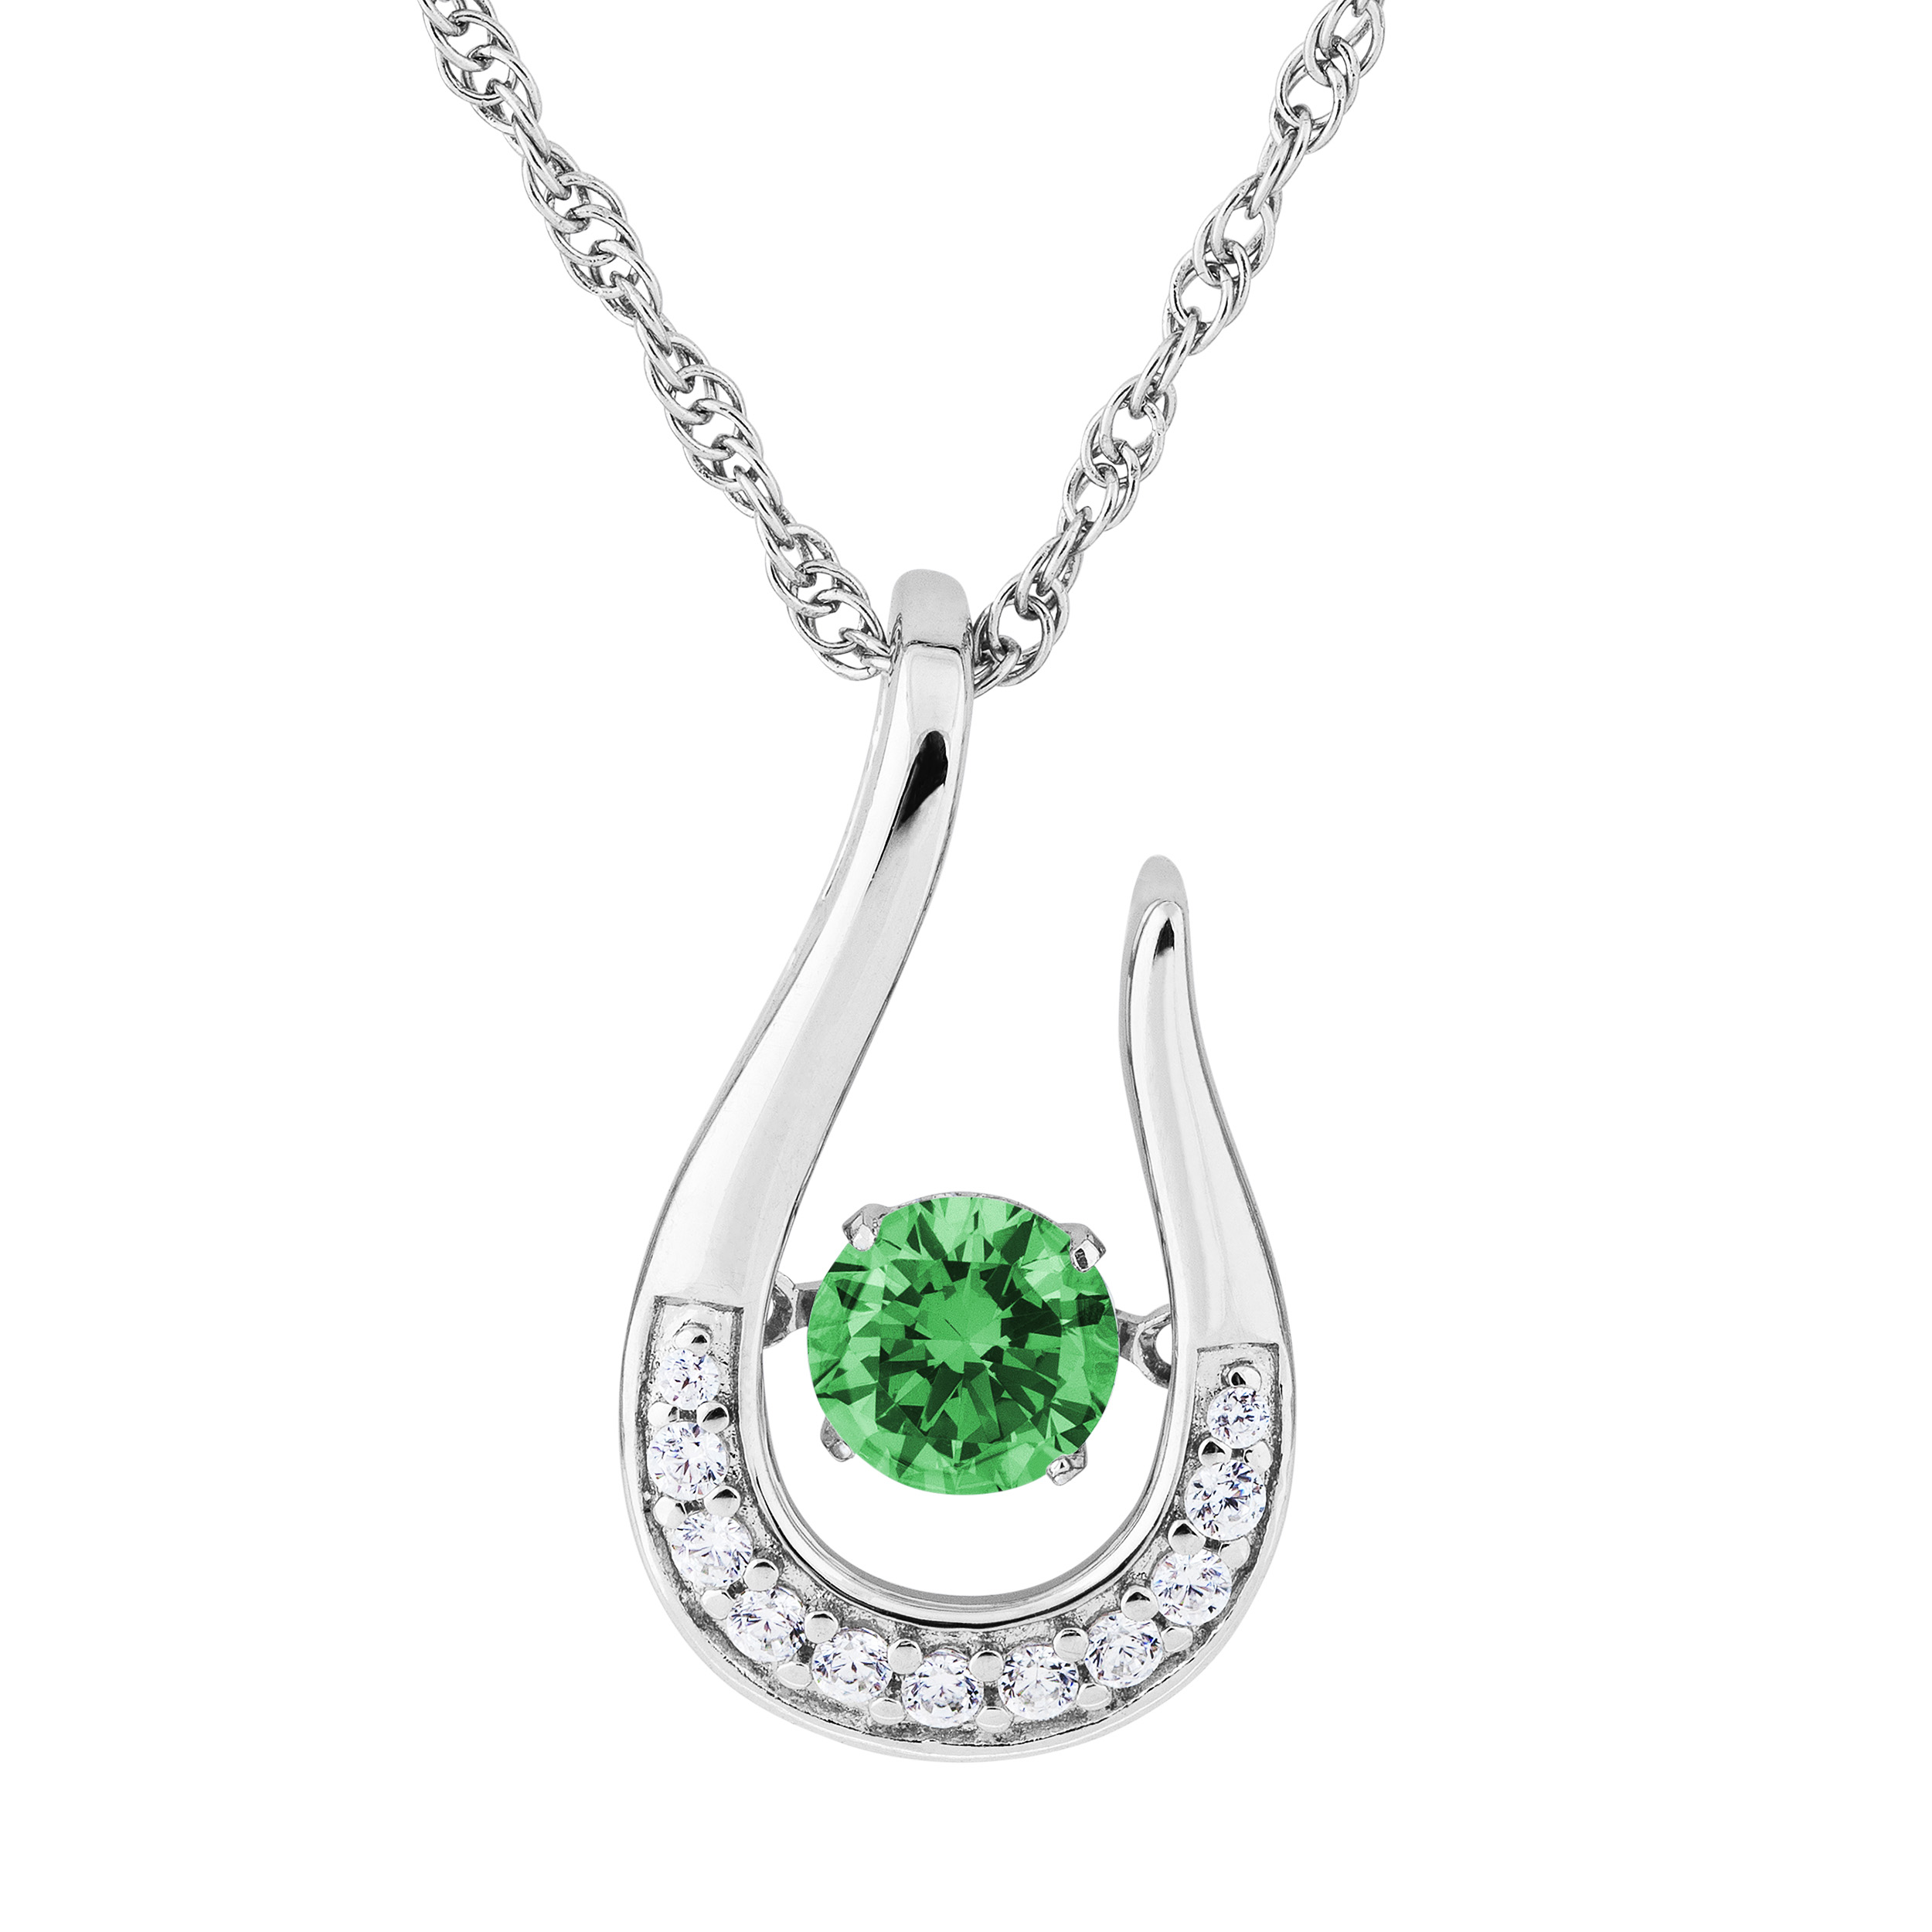 Emerald CZ with Cubic Zirconia May Teardrop Pendant Necklace, Rhodium Plated Sterling Silver, 18